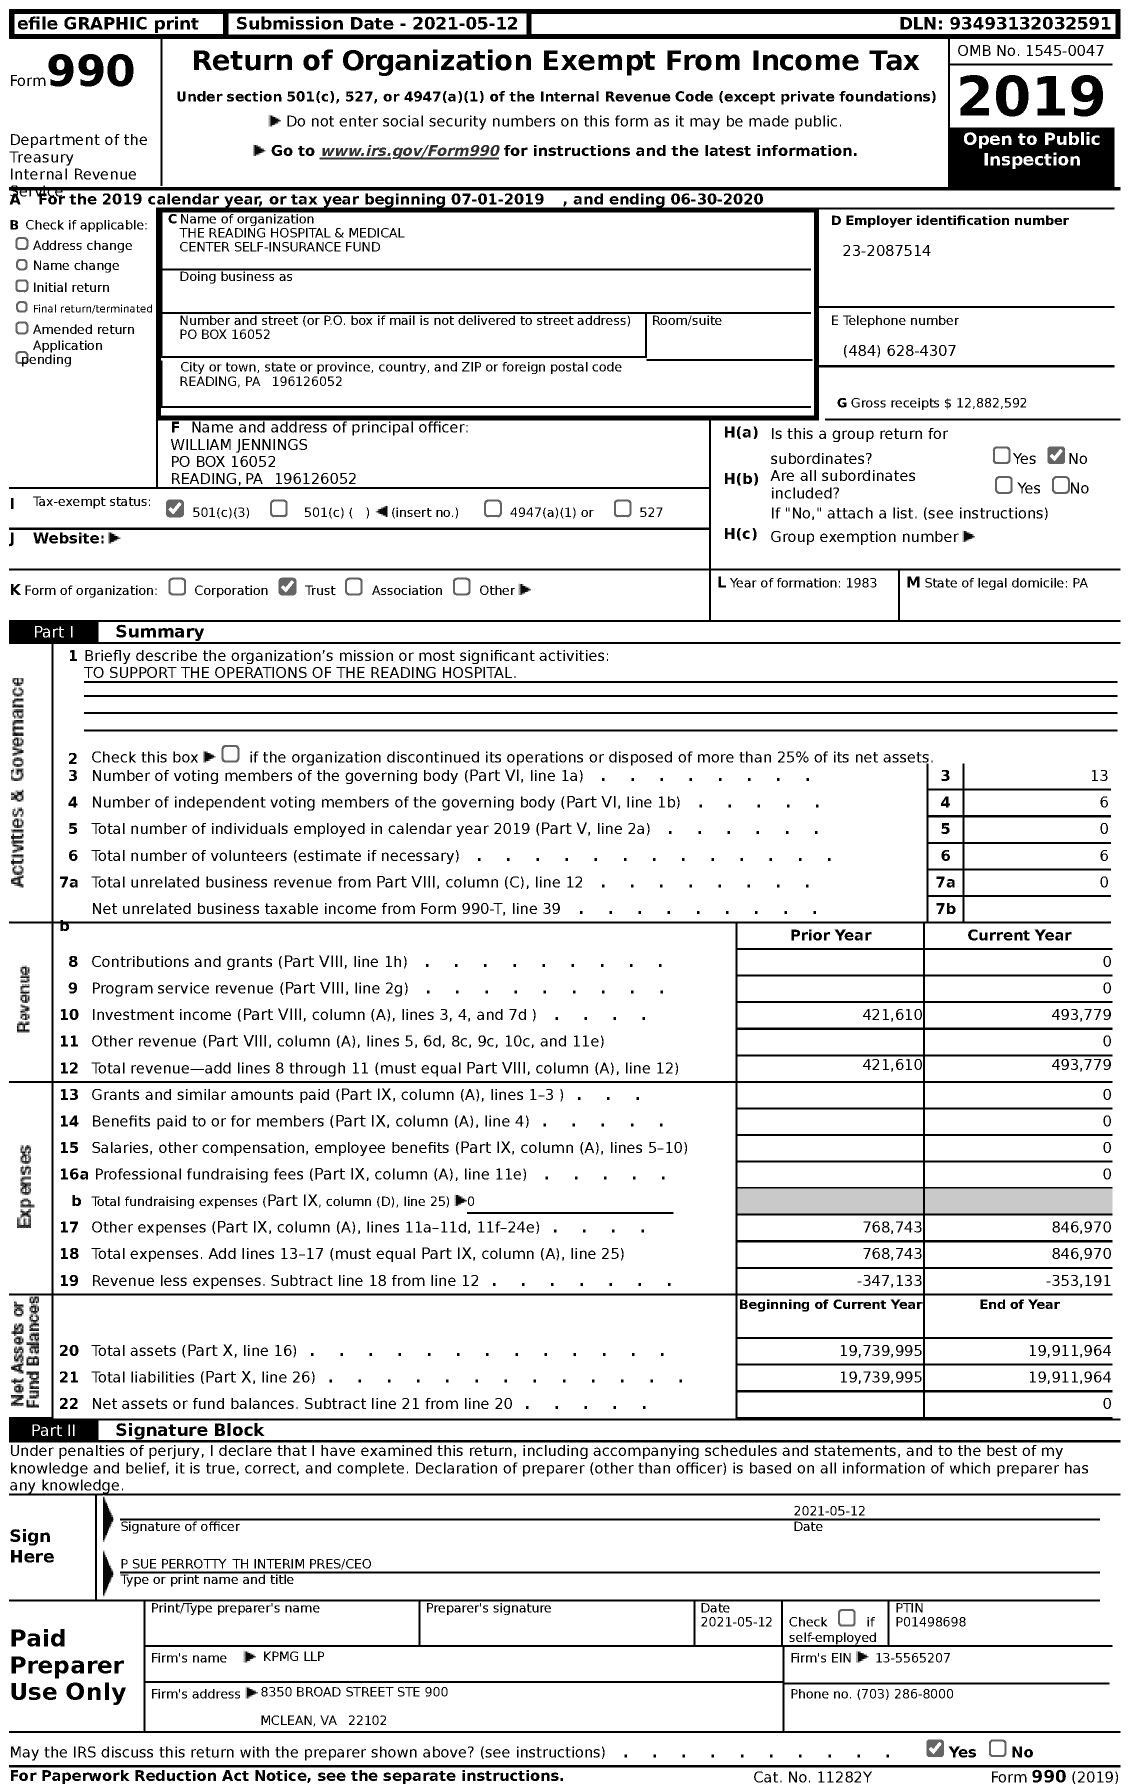 Image of first page of 2019 Form 990 for The Reading Hospital and Medical Center Self-Insurance Fund